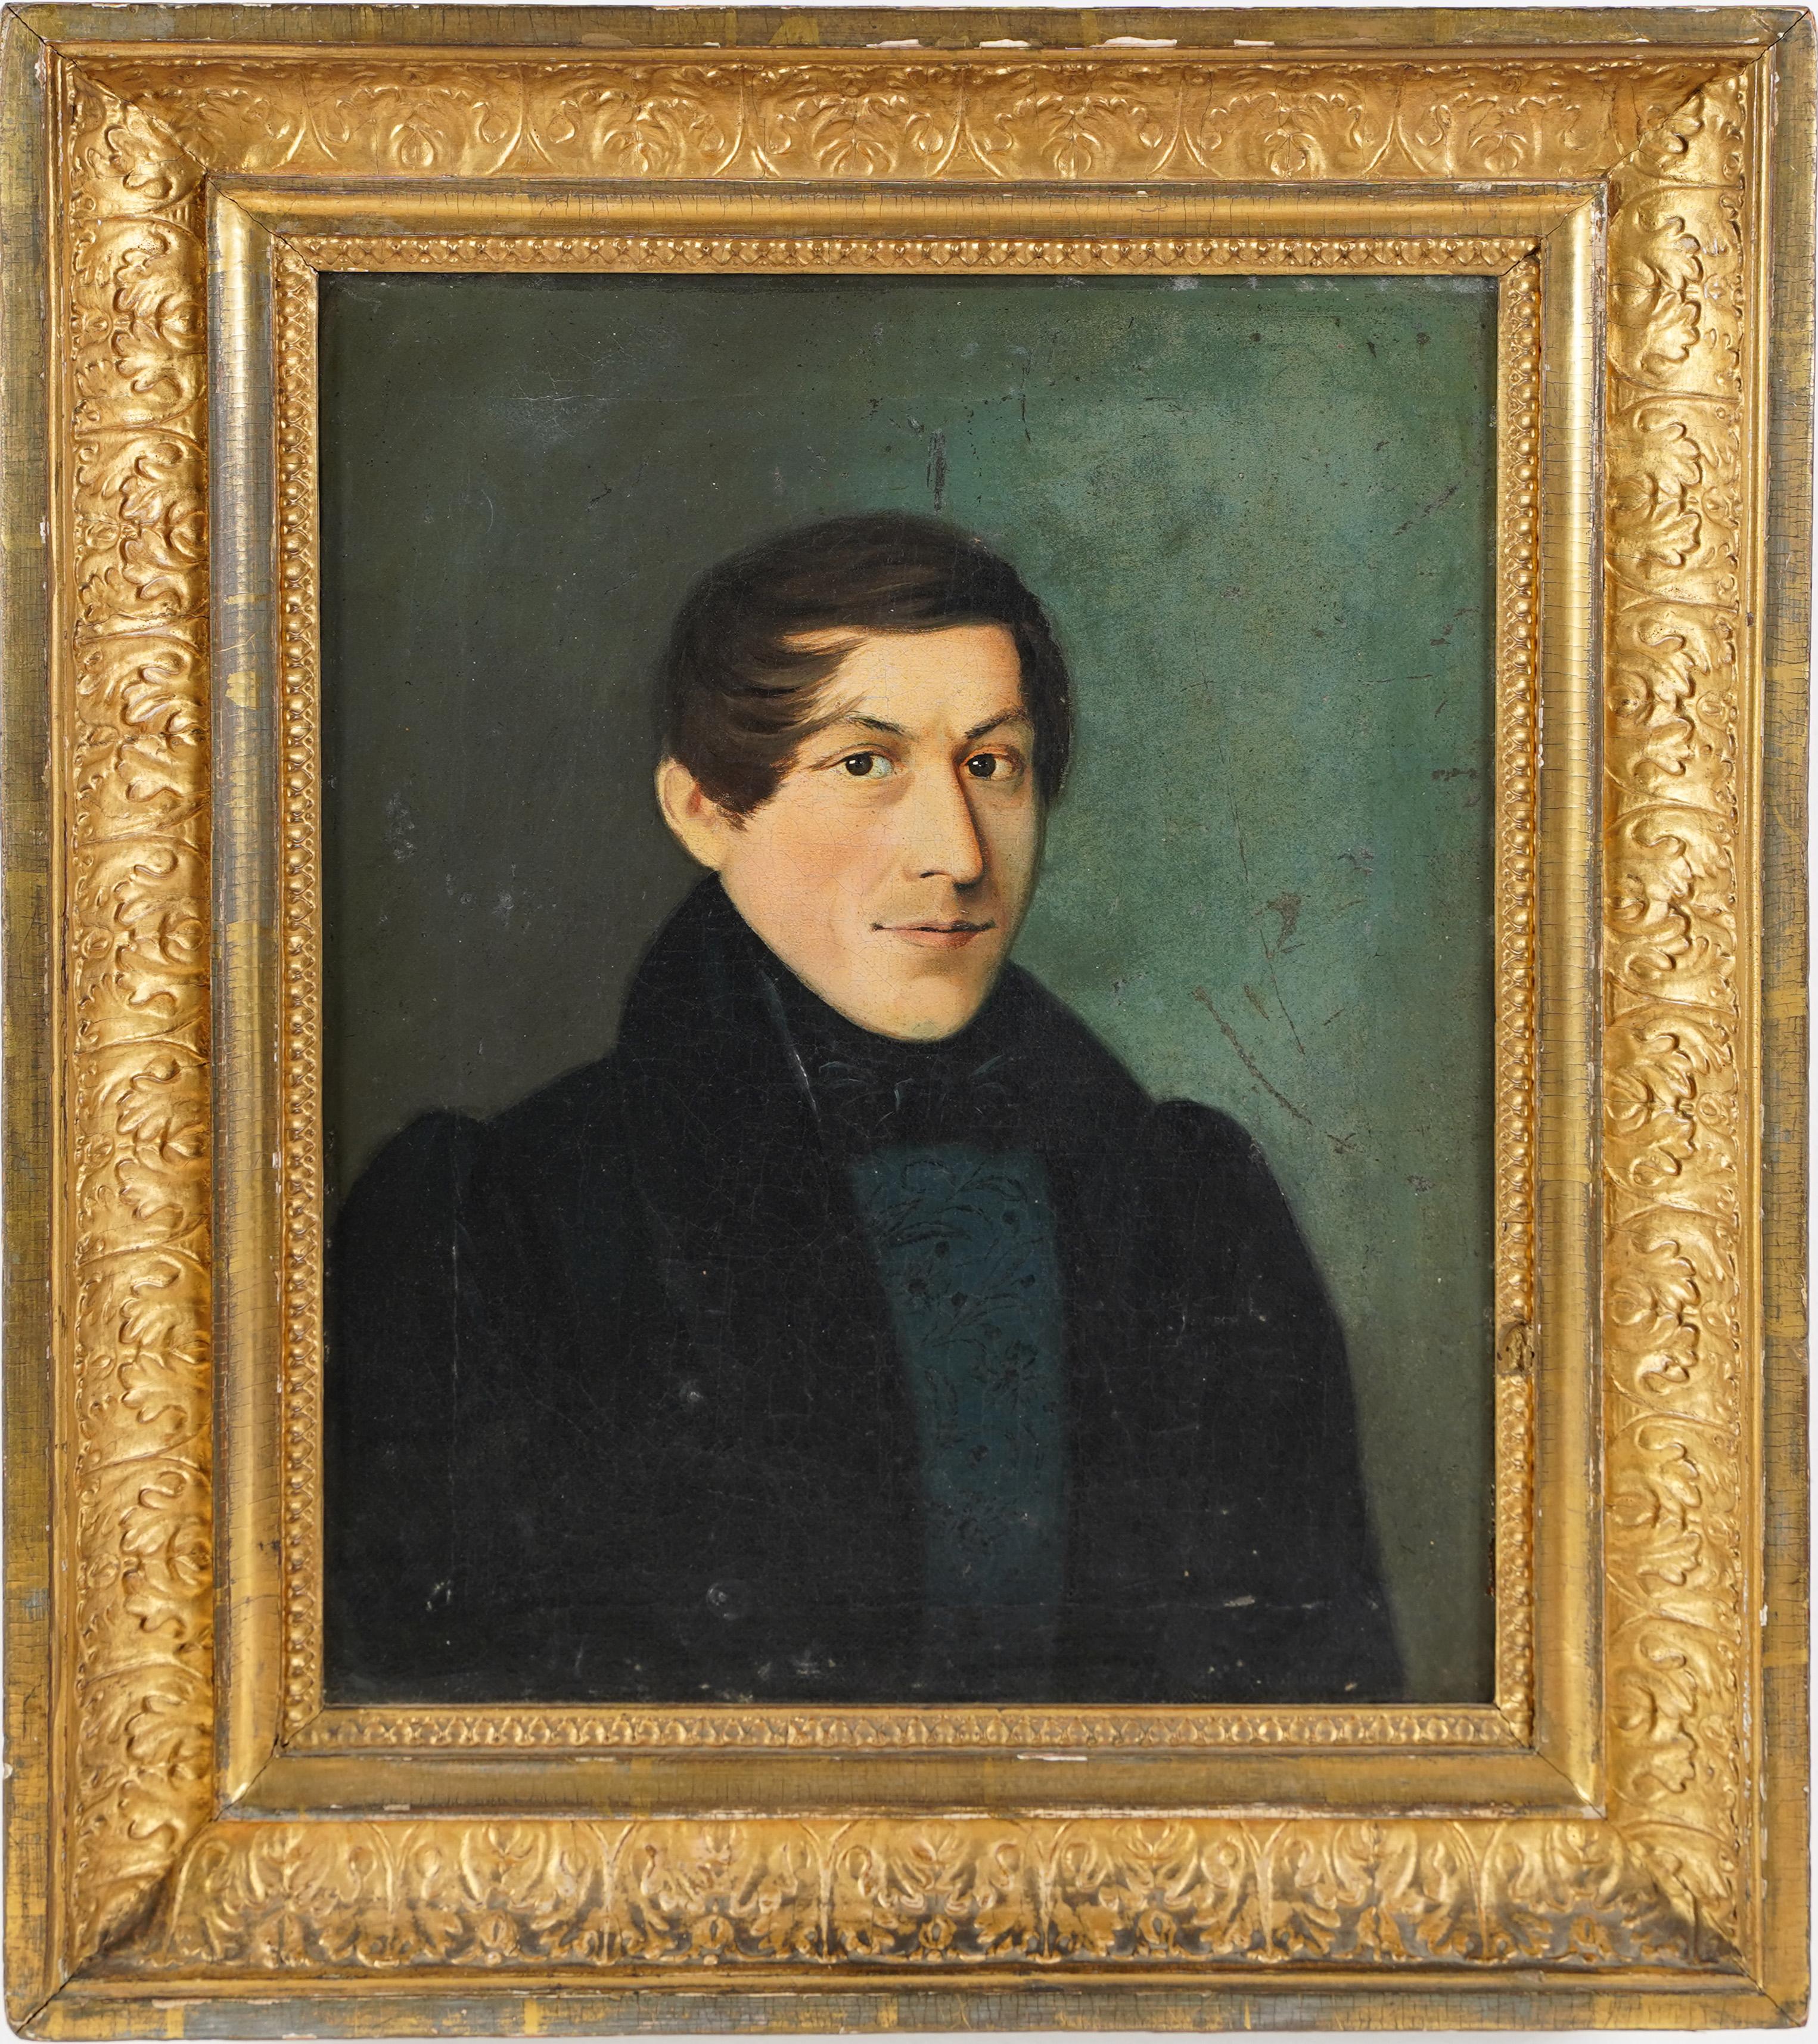 Antique American school portrait oil painting.  Oil on canvas.  Framed.  Image size, 11L x 14.5H.